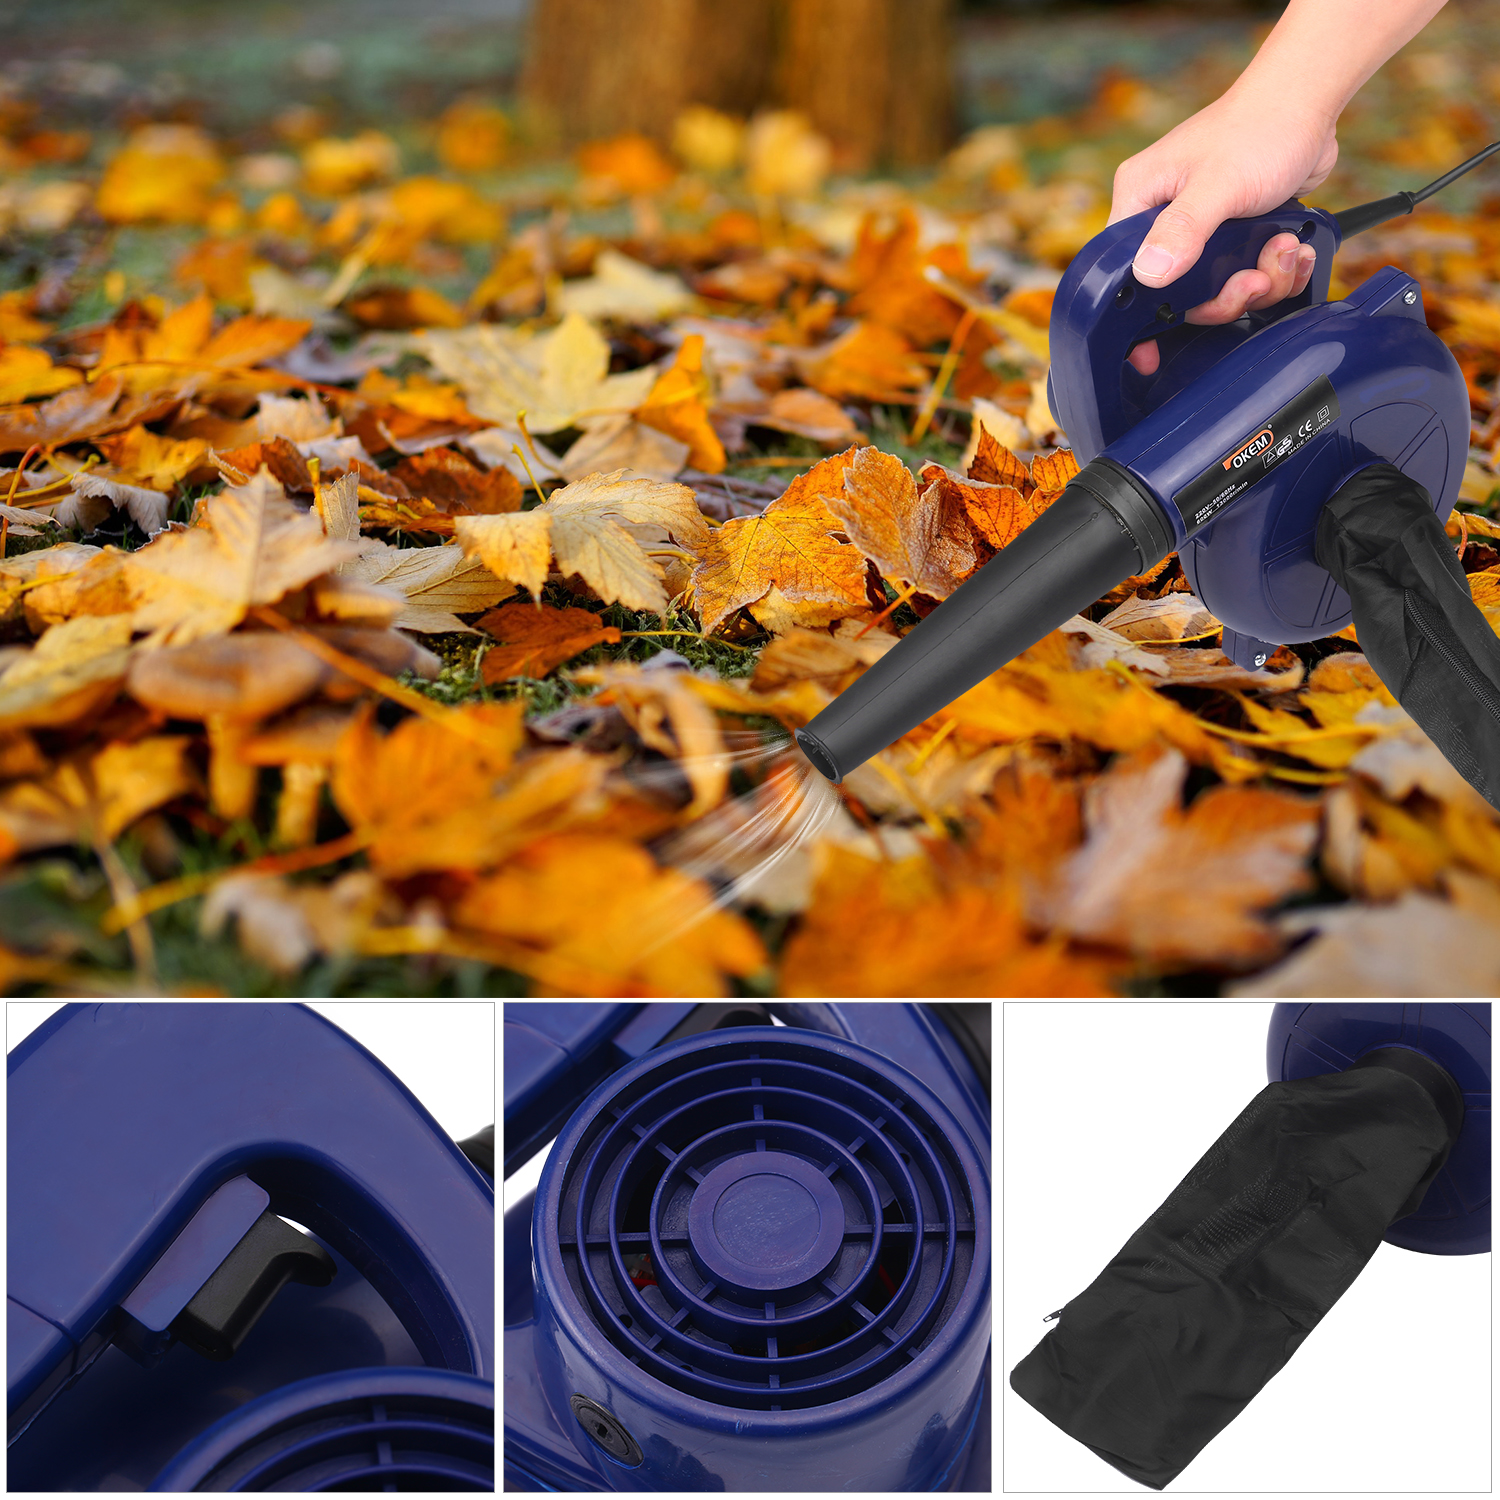 Leaf Blower 3-in-1 Yard Blower Vacuum 600W Cleaner for Car Air Pump for Inflatables with Dust Collector Bag and Taper Nozzle